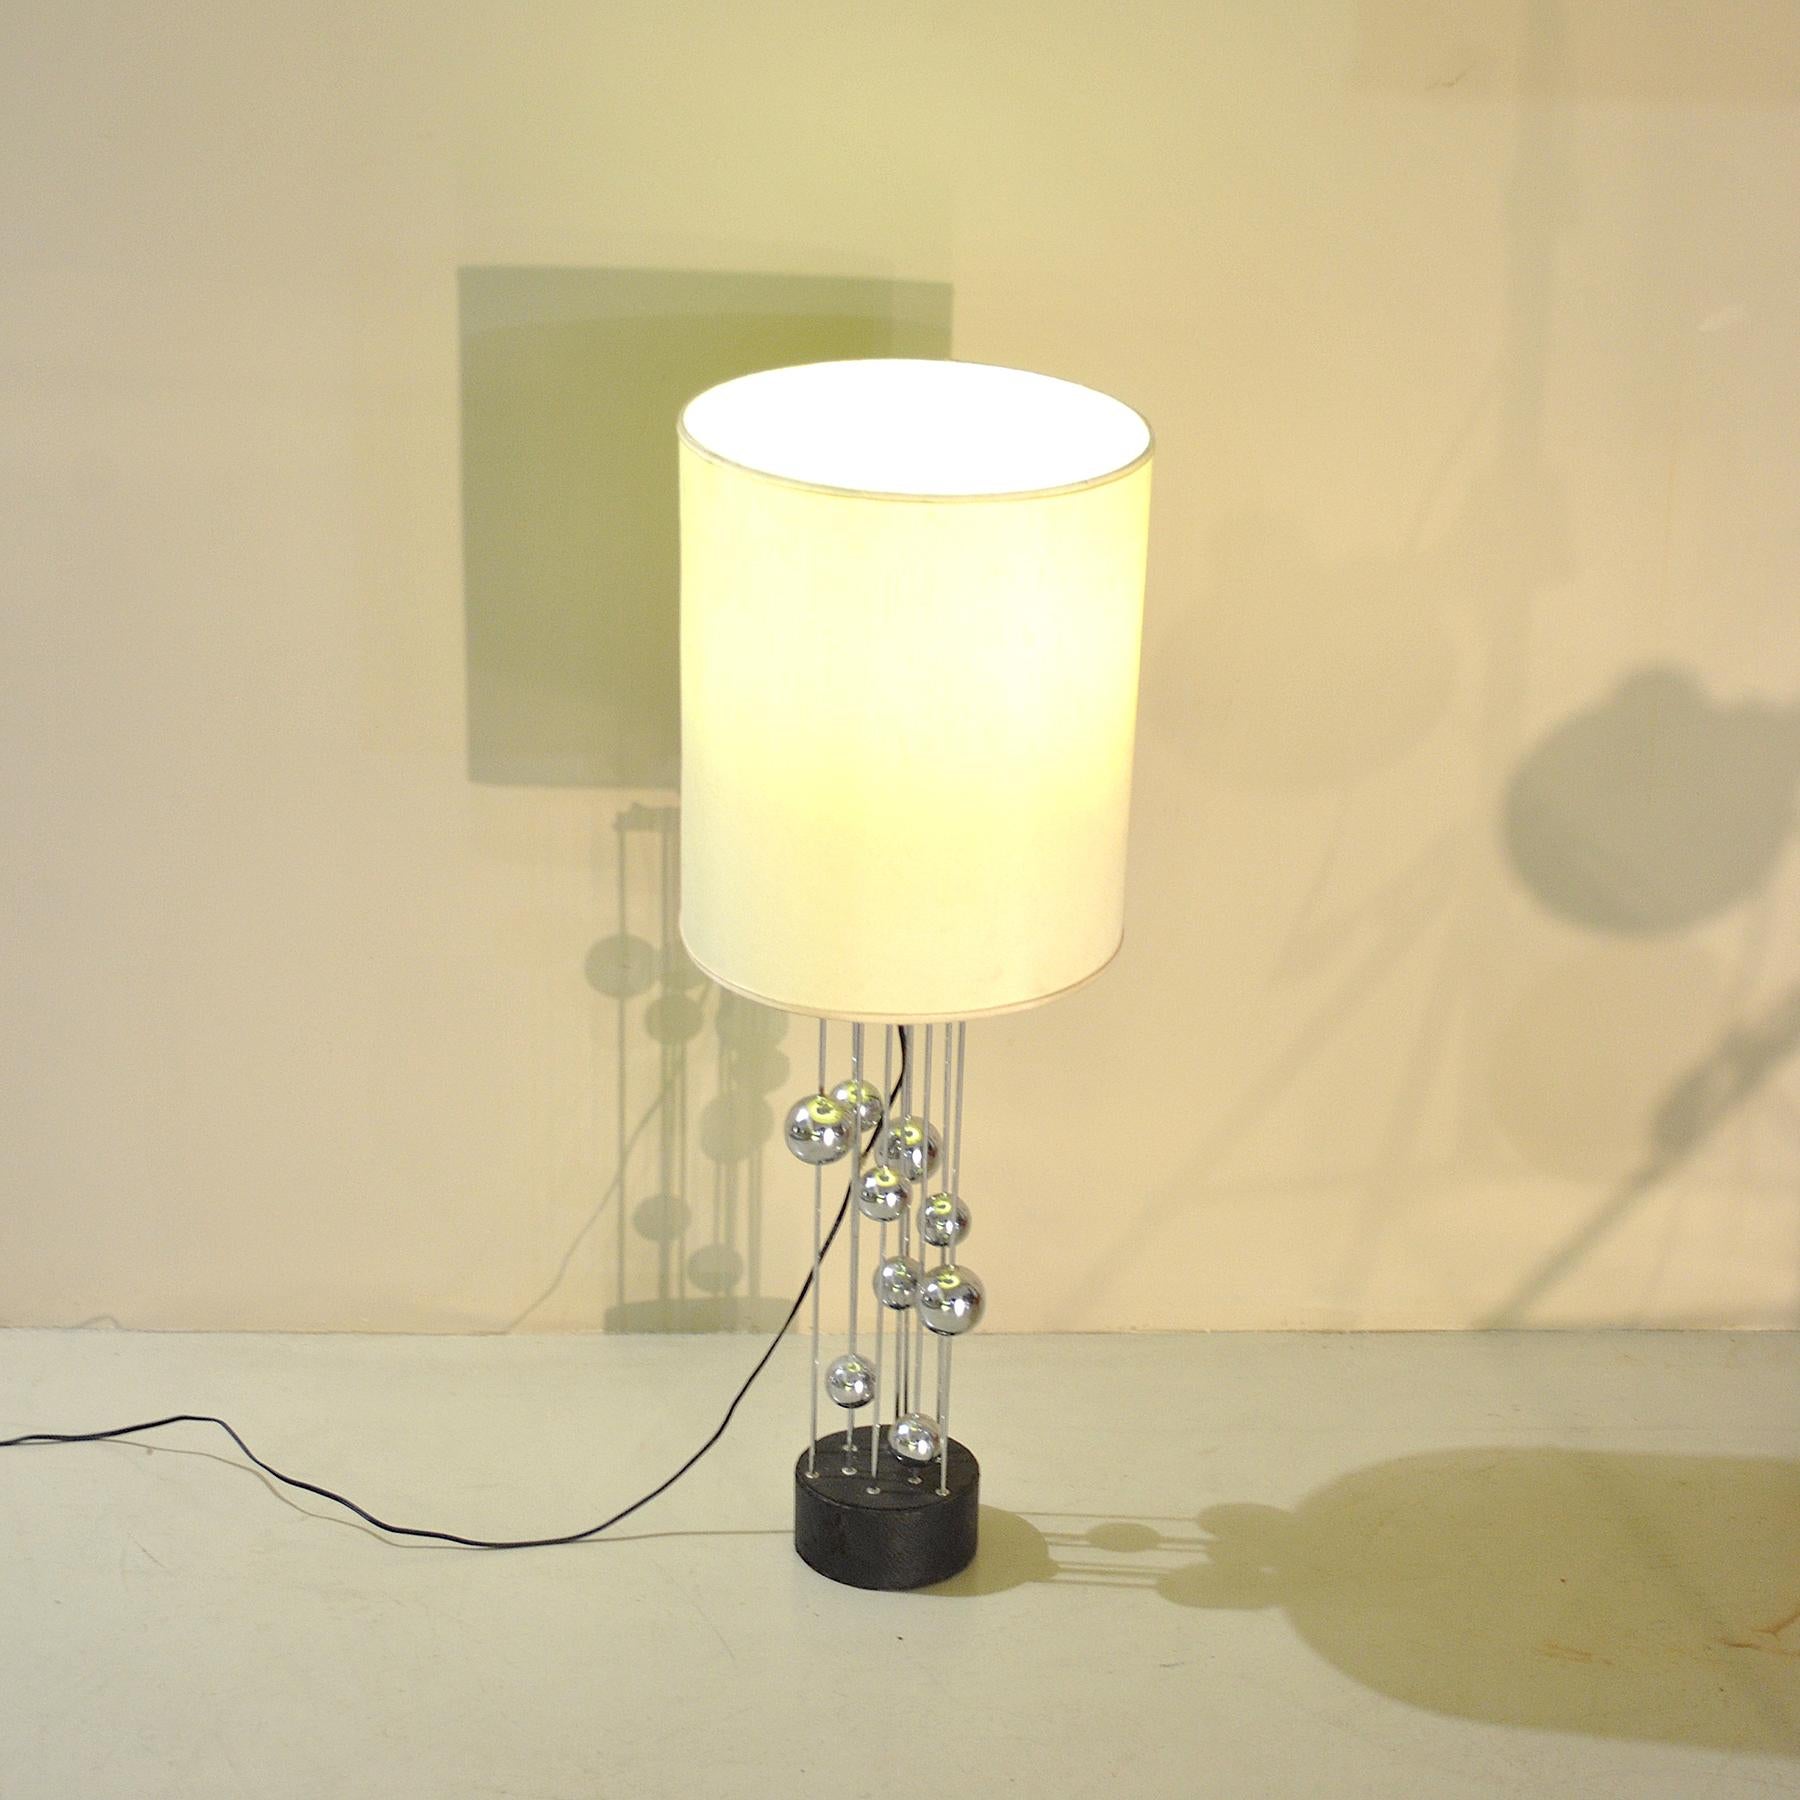 Italian Midcentury Table Lamp Space Age For Sale 1